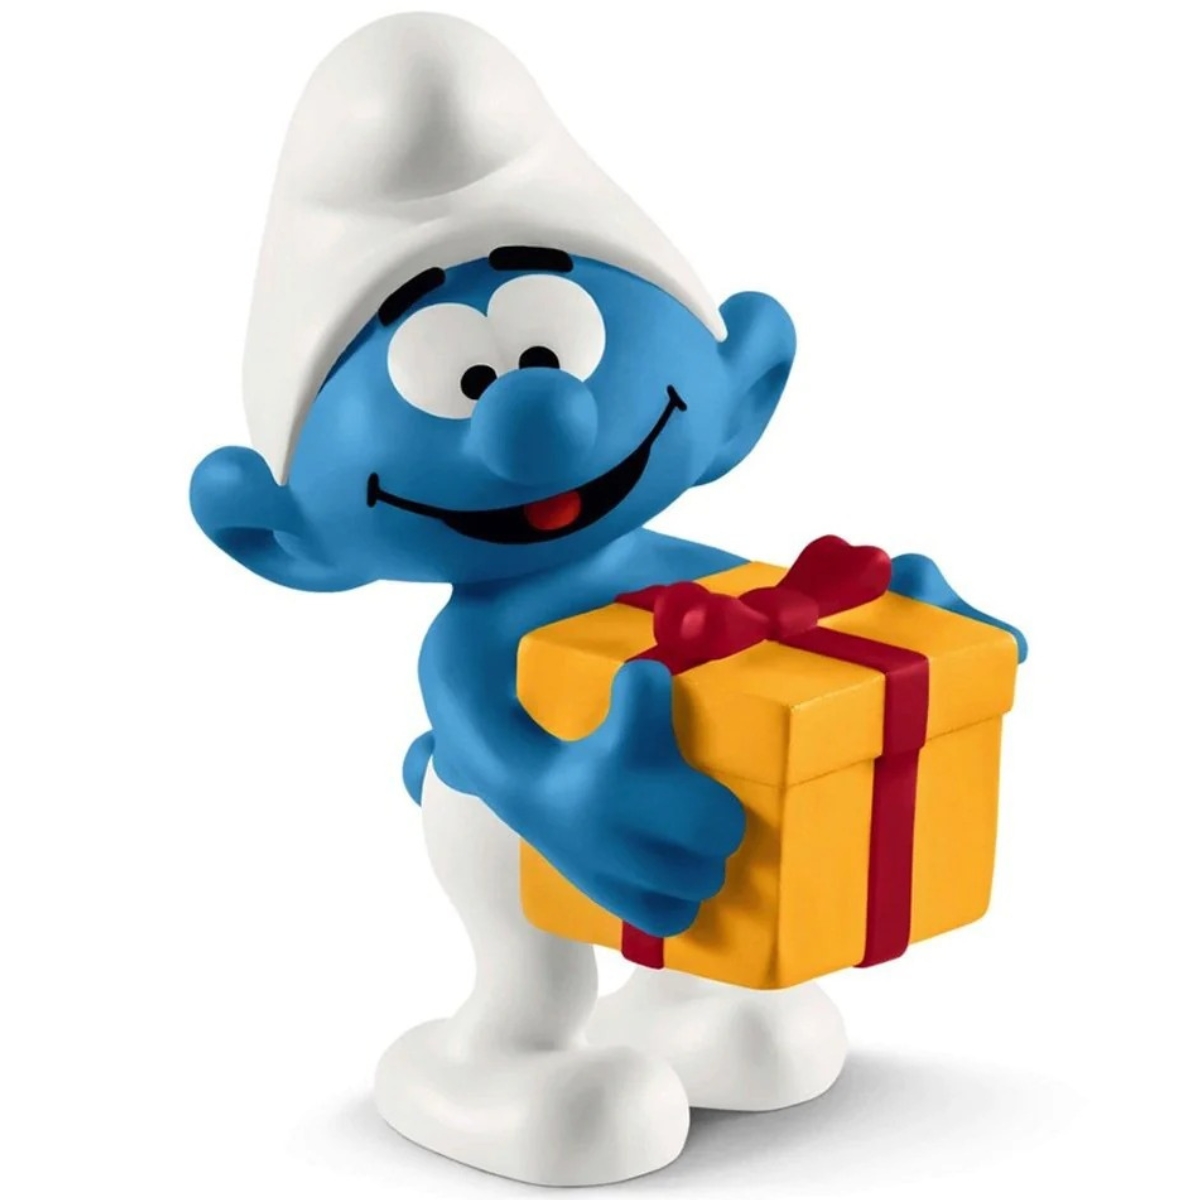 19-facts-about-jokey-smurf-the-smurfs